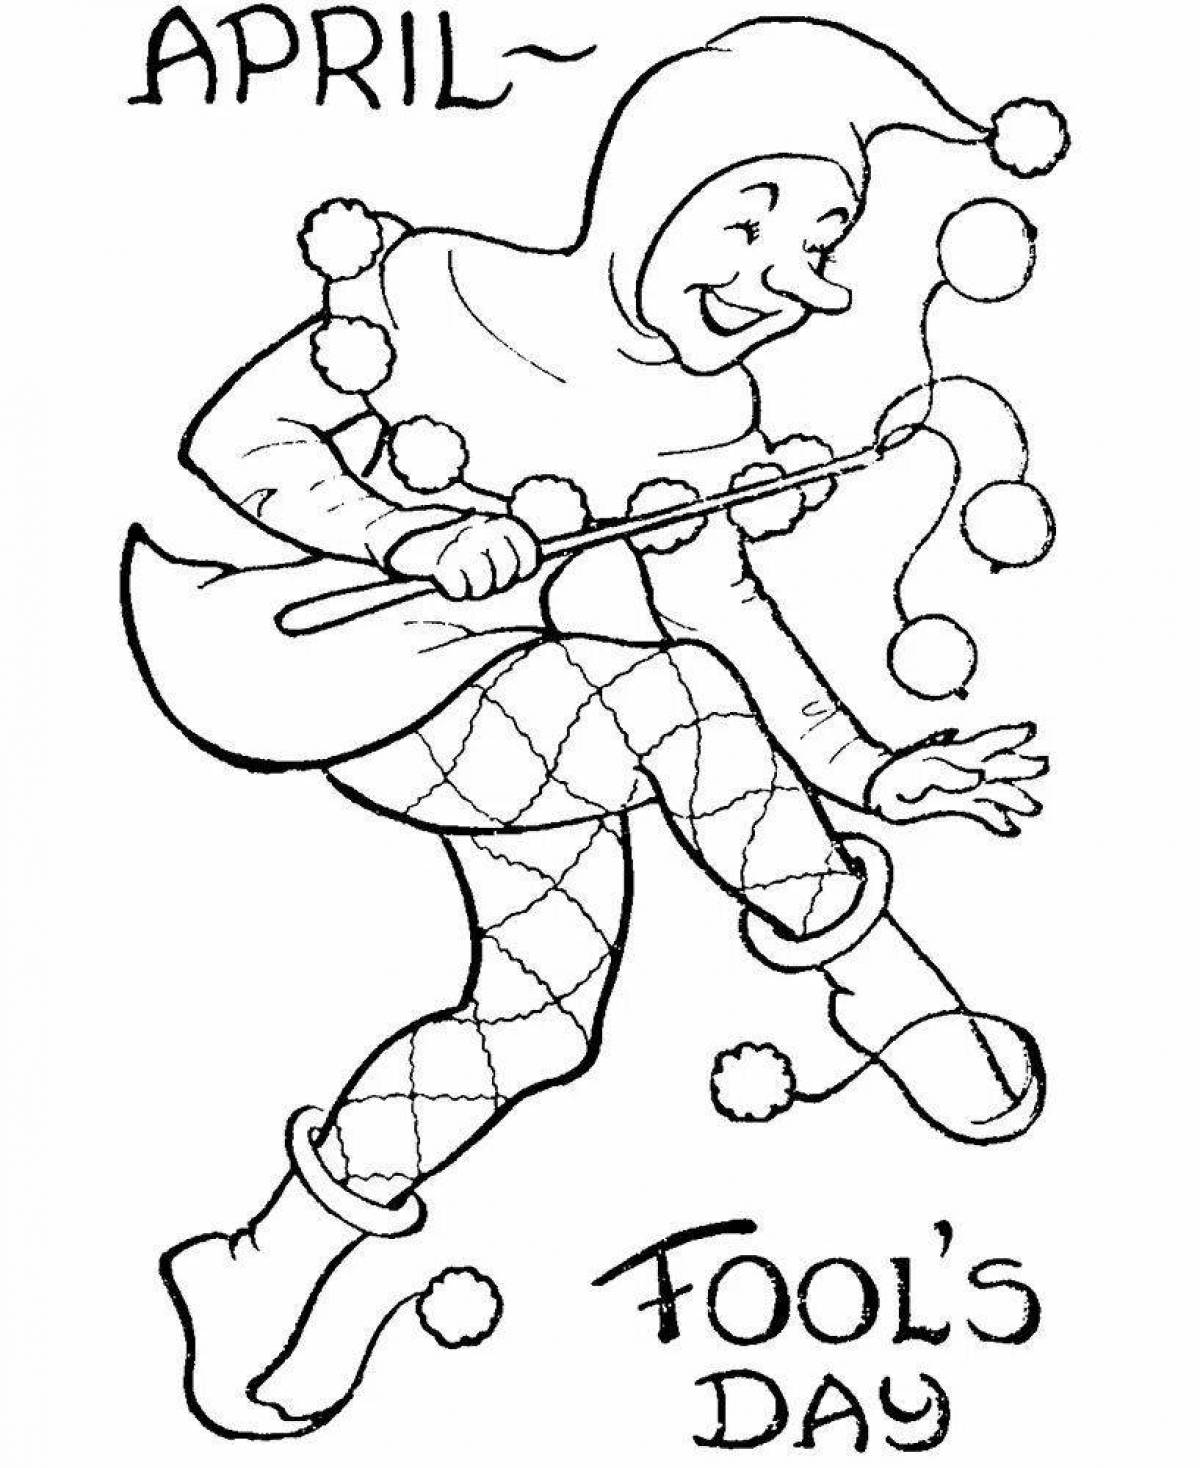 Live jester coloring book